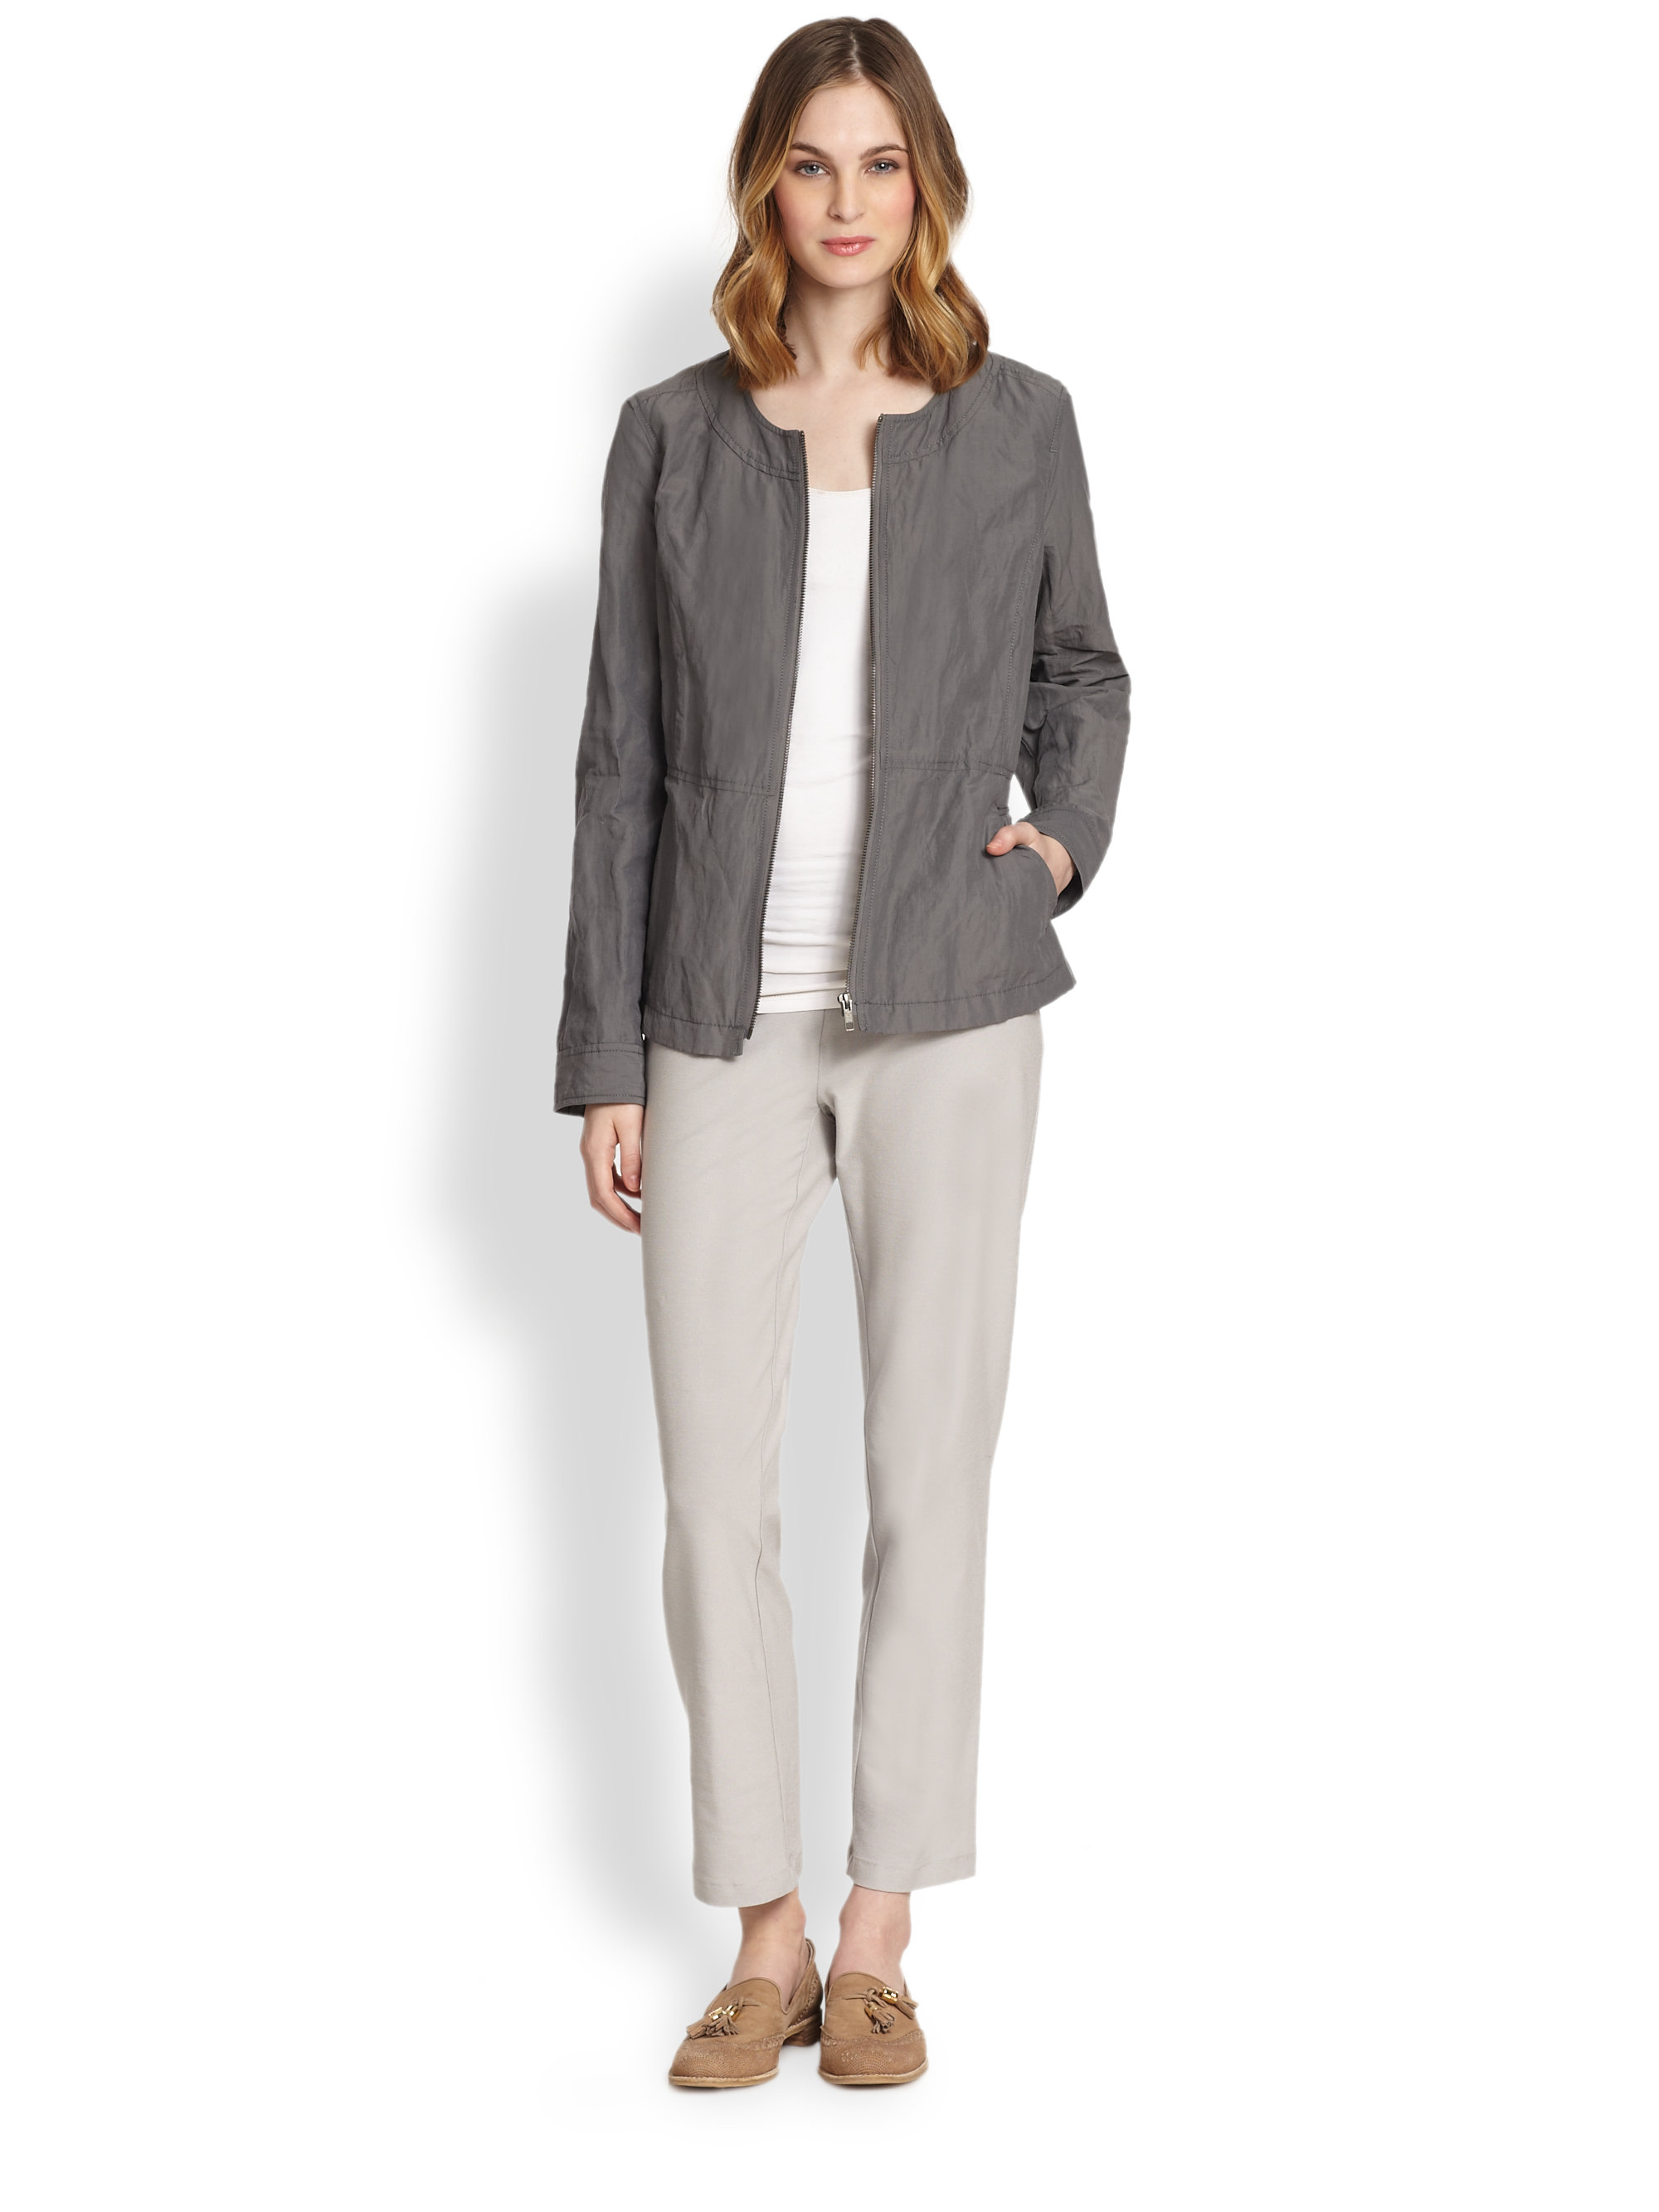 Lyst - Eileen Fisher Crinkled Jacket in Gray